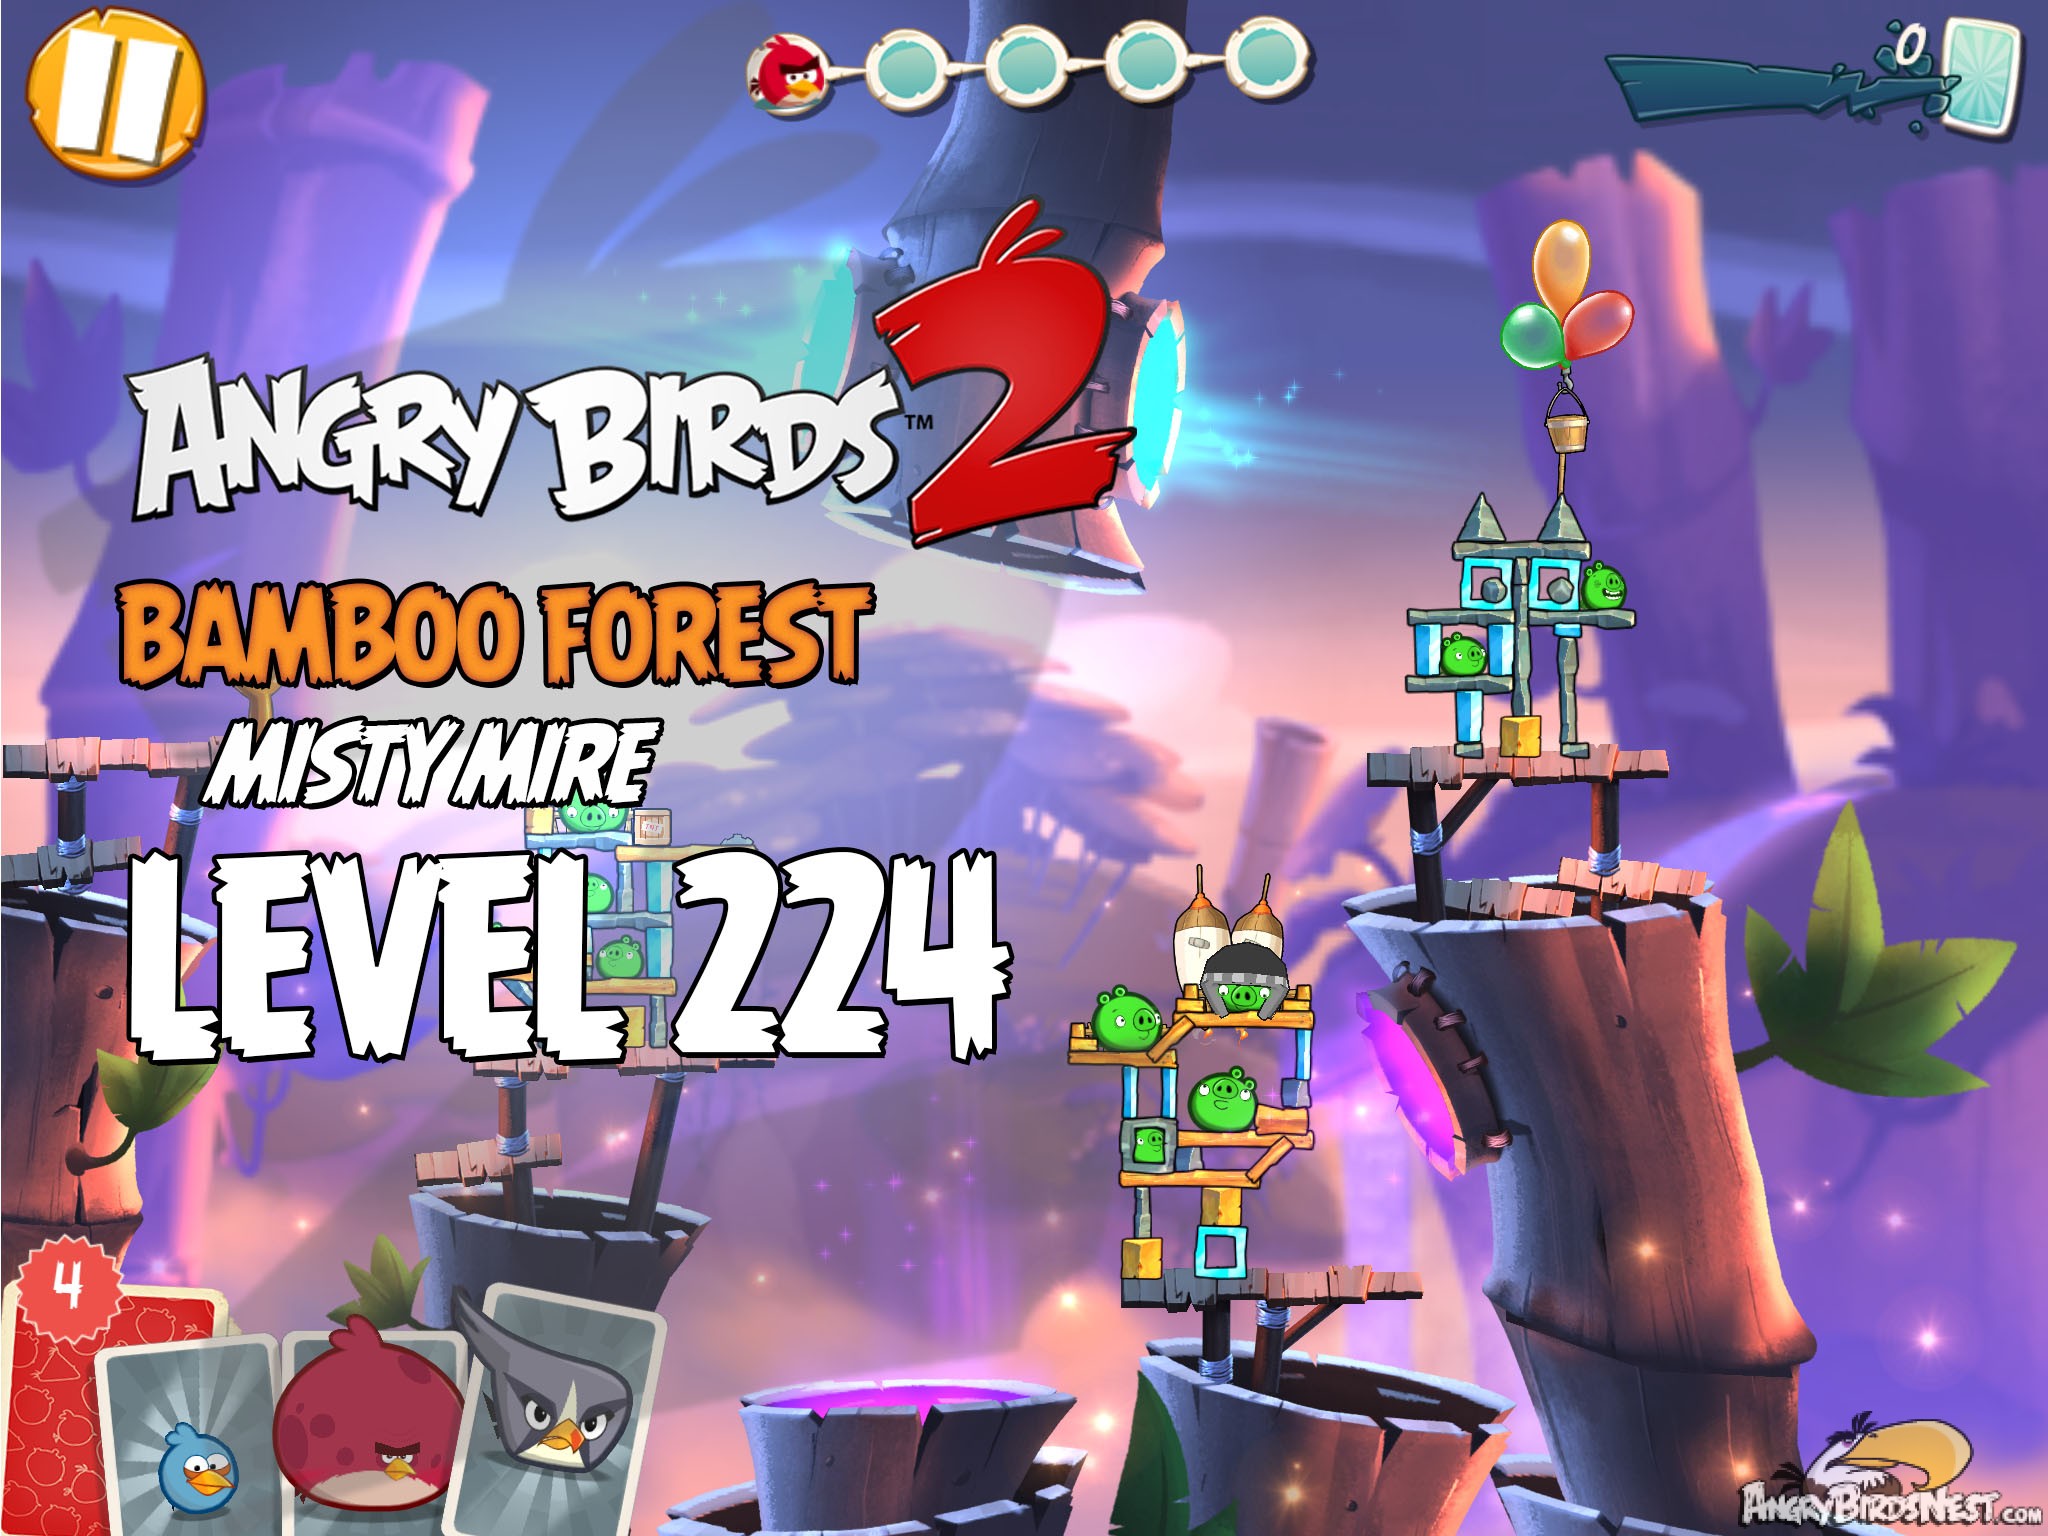 Angry Birds 2 Bamboo Forest Misty Mire Level 224